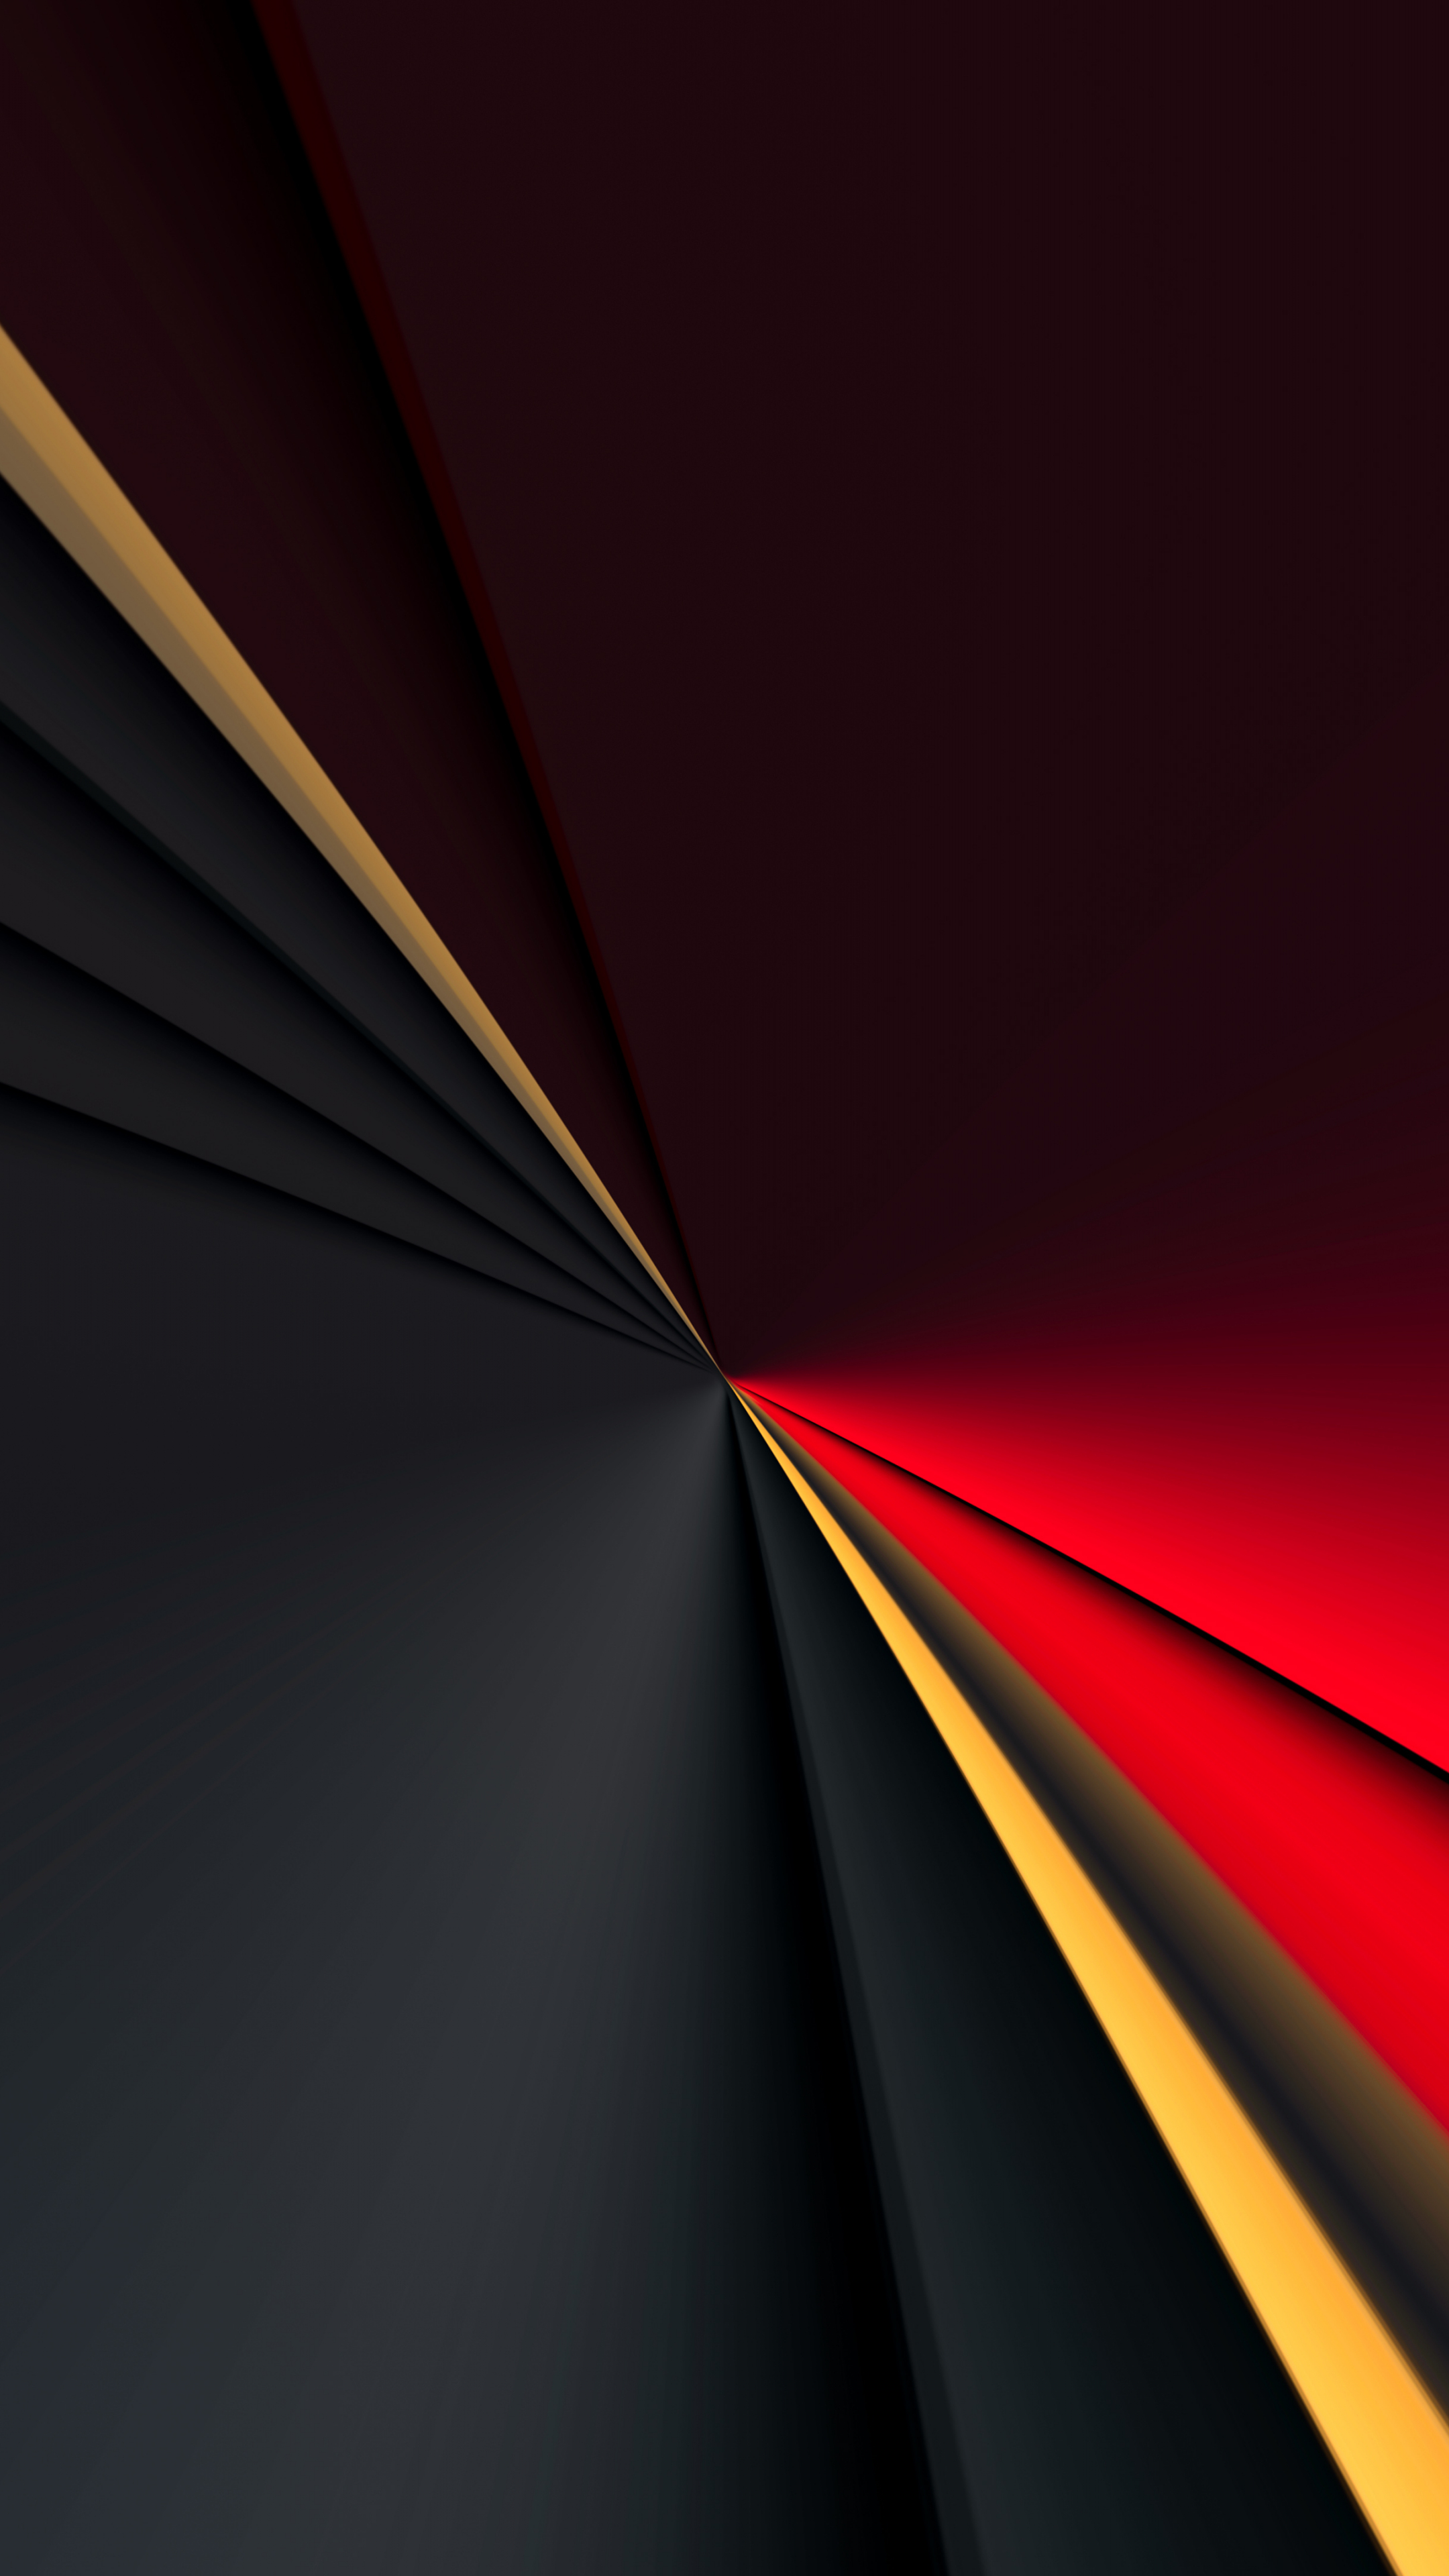 Download wallpaper 2160x3840 abstract, dark and multi-colored stripes ...